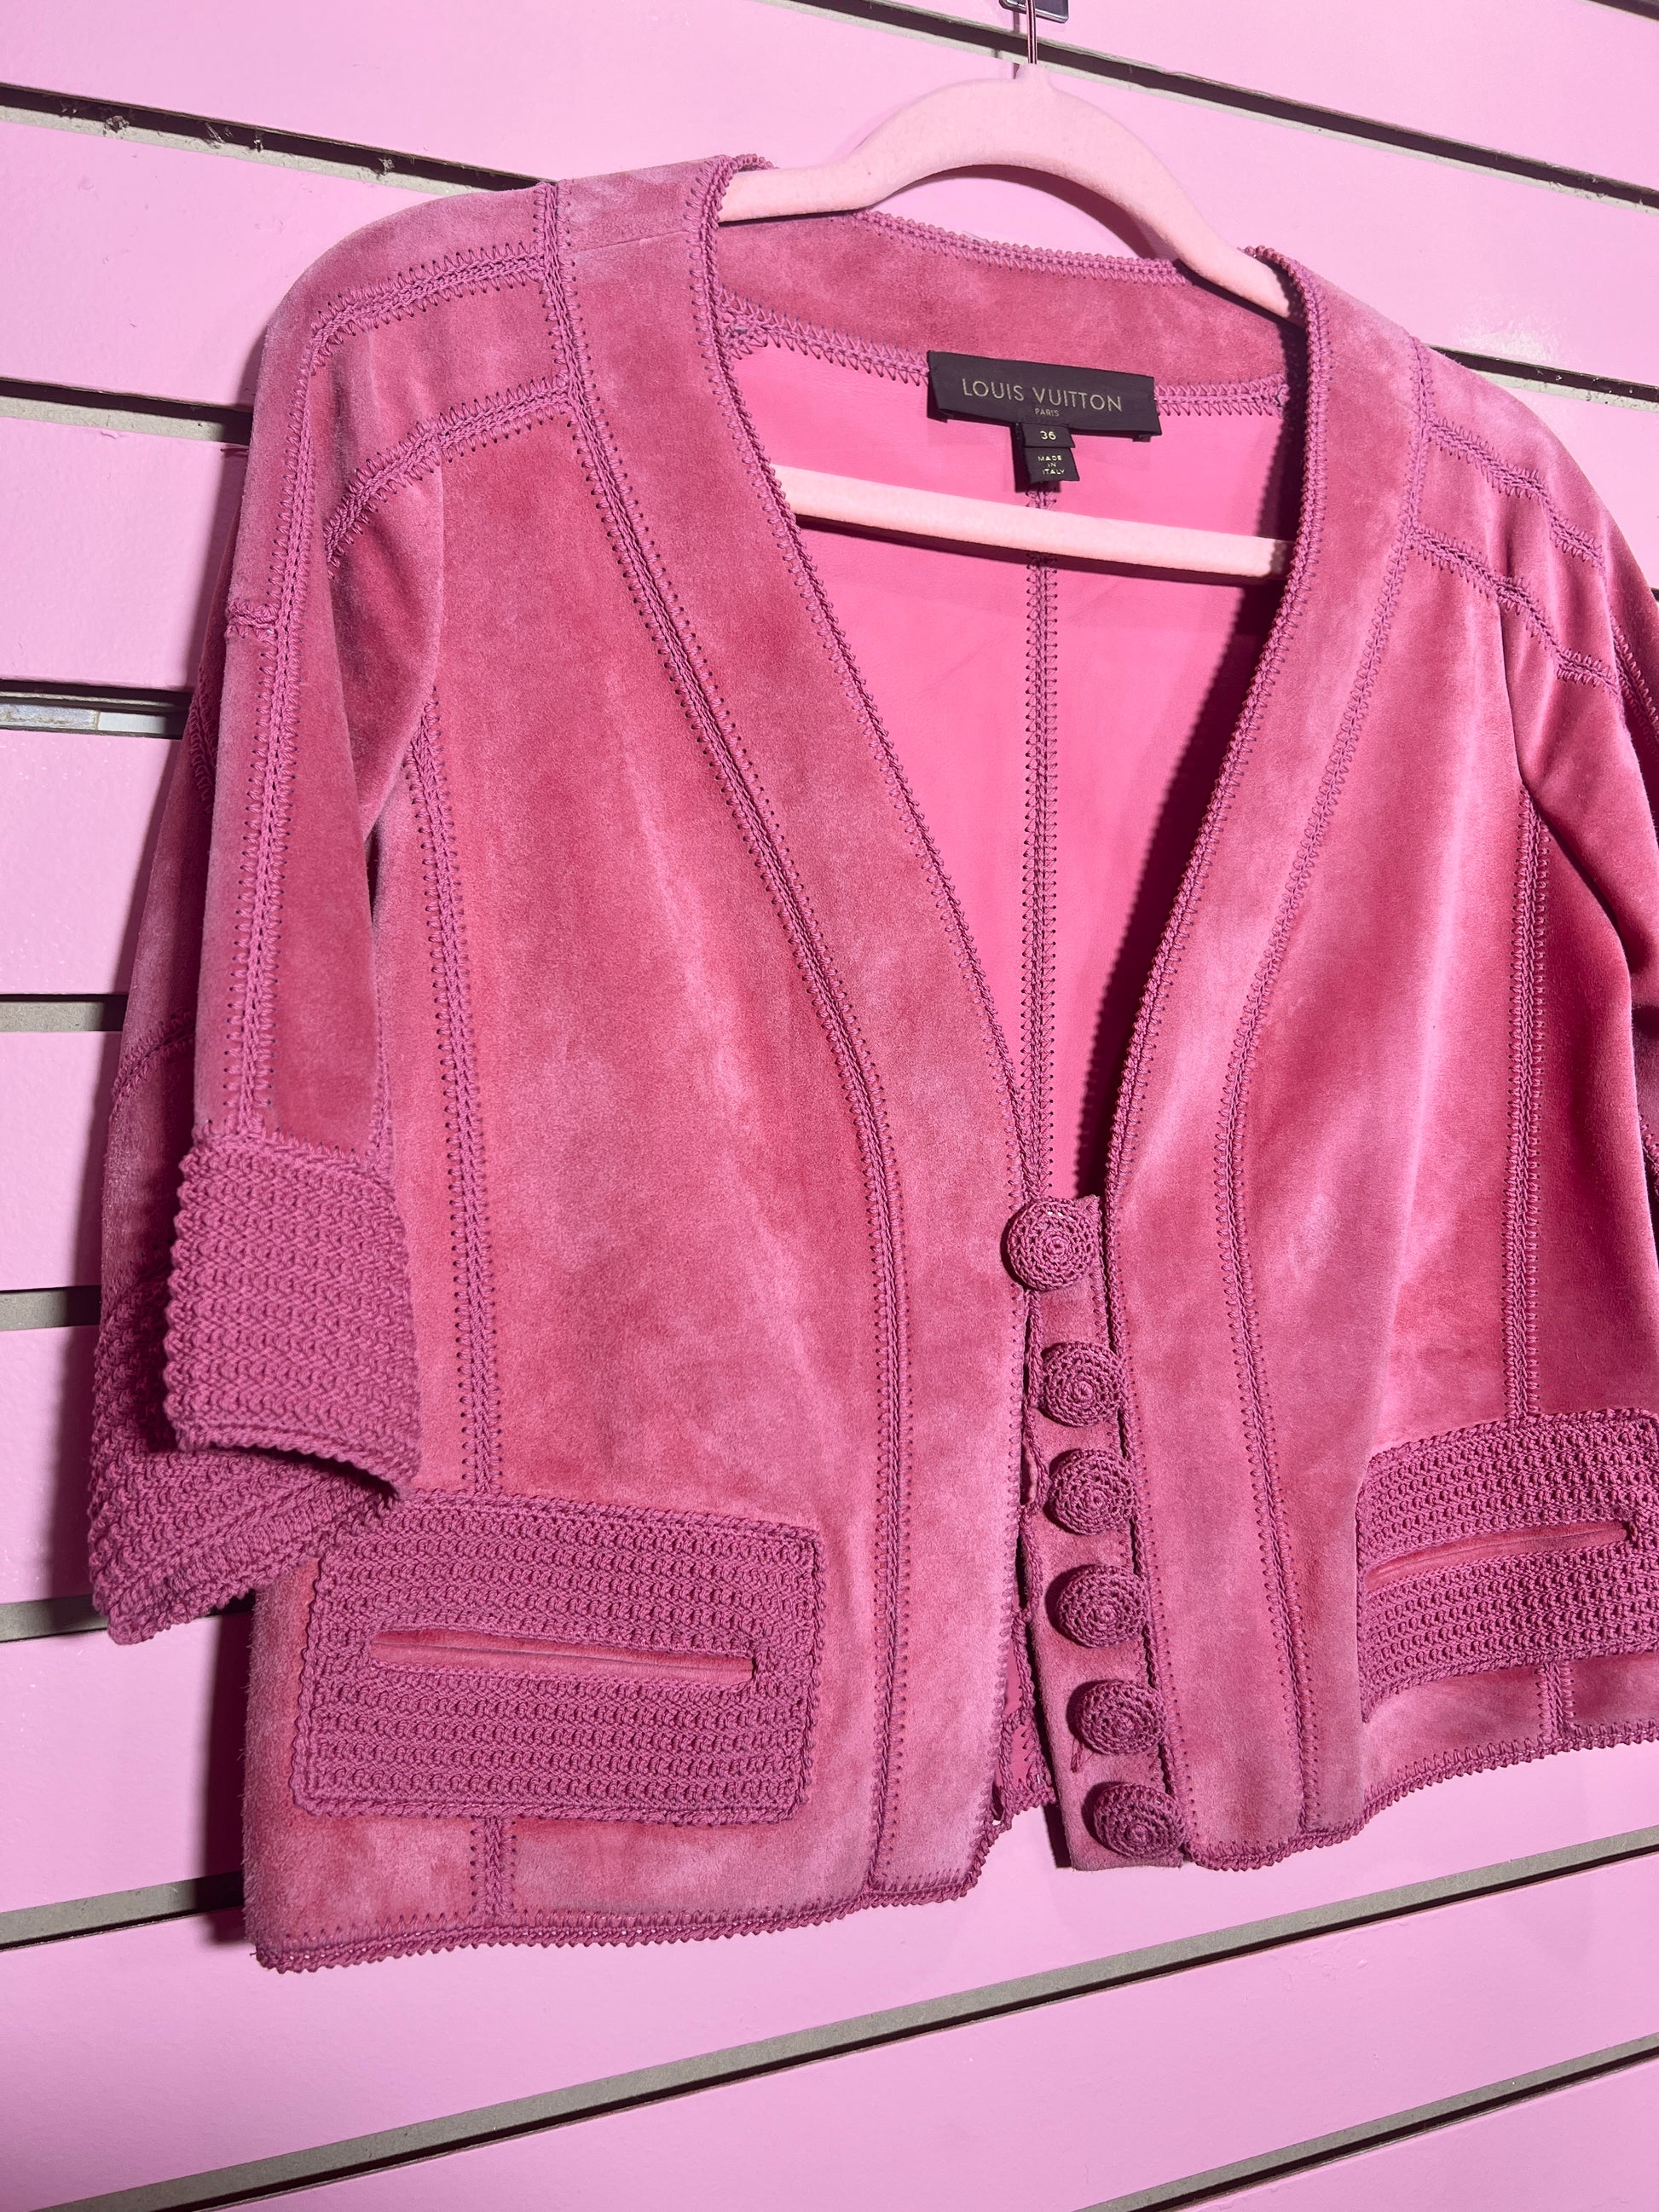 LOUIS VUITTON Half Coat 38 Pink Authentic Women Used from Japan